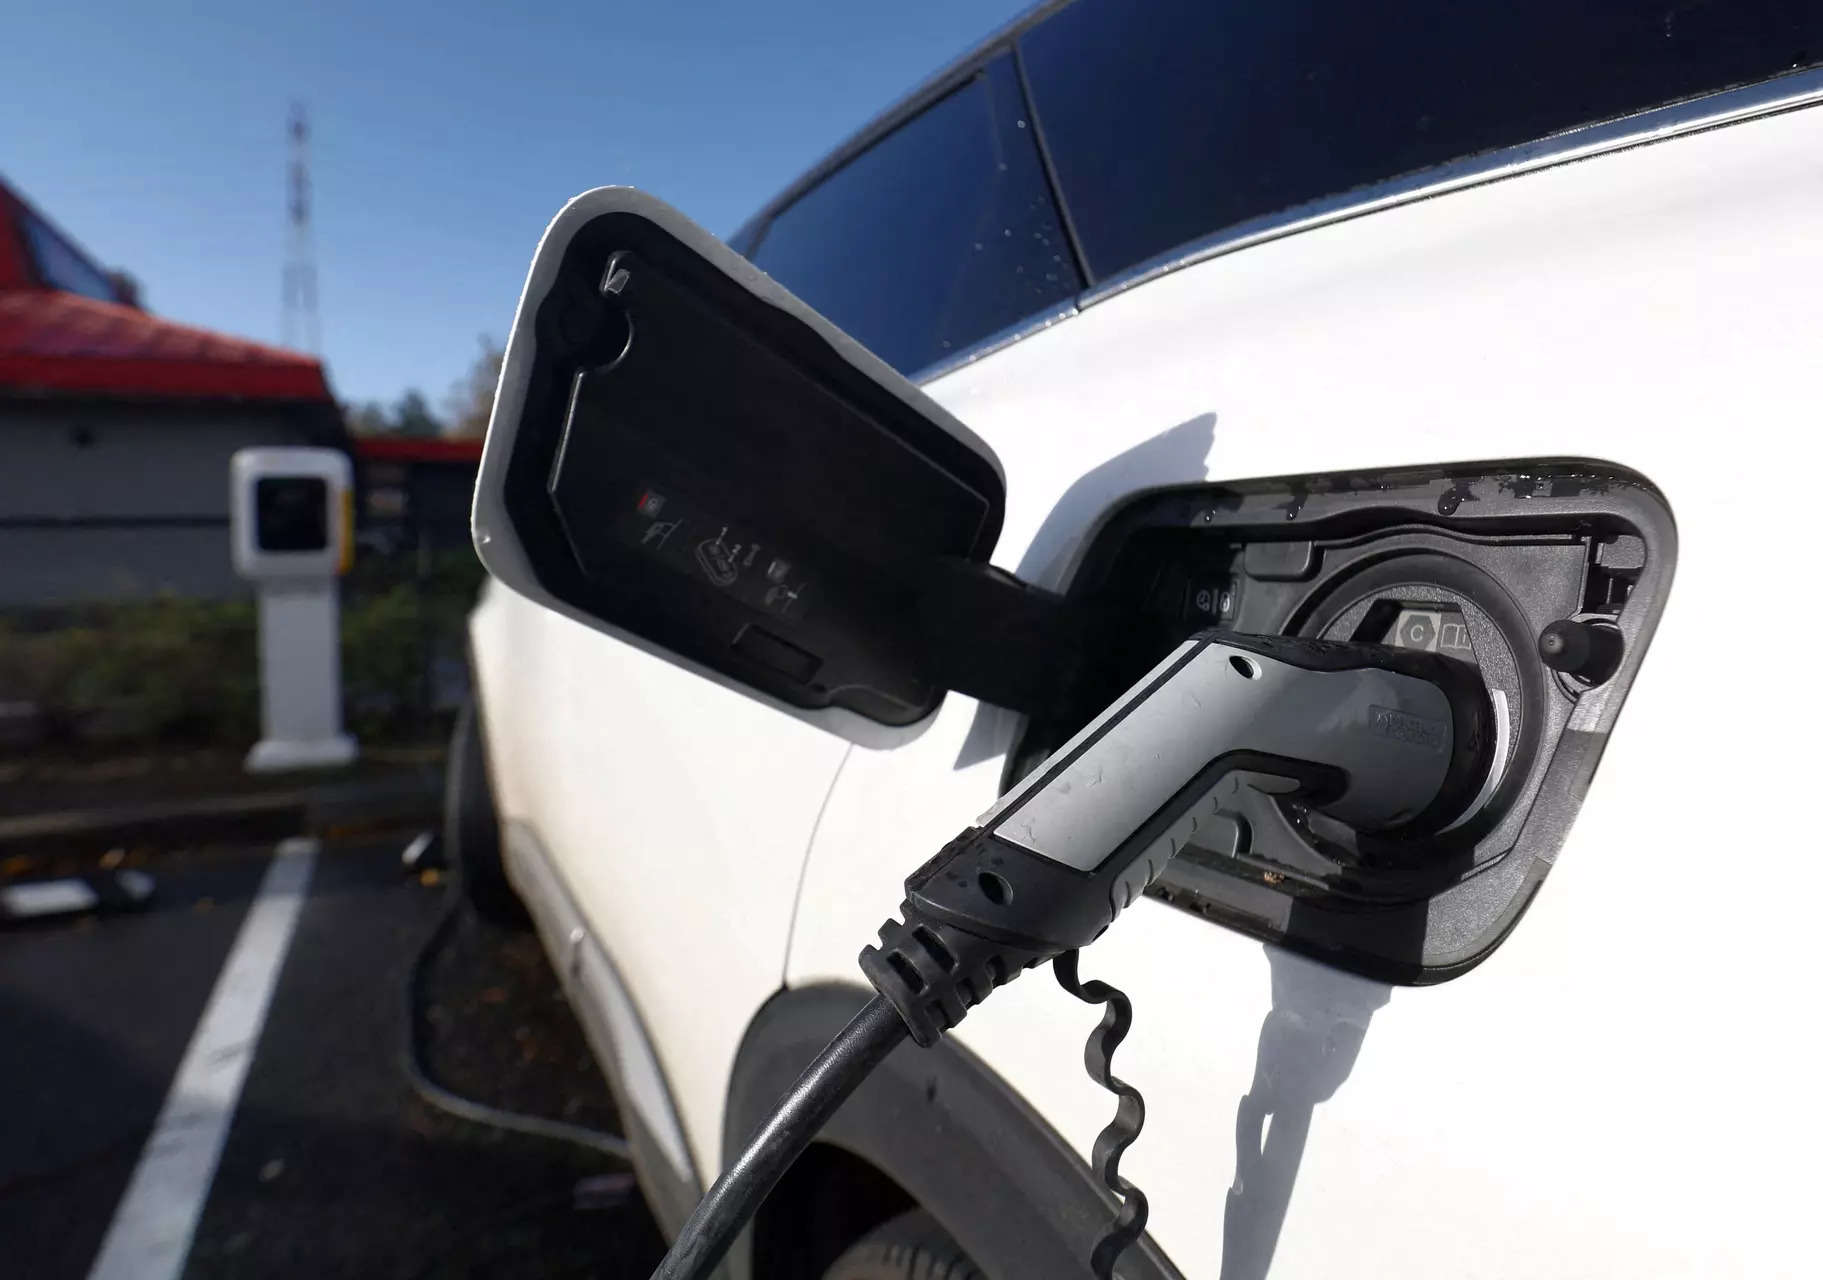 <p>Muted sales of lubricants globally as various developed countries are in the process of phasing out ICE (internal combustion engine) vehicles and promoting electric vehicles along with the need for a charging infrastructure in EV markets have prompted many lube companies and fuel retail firms to enter the EC charging space.</p>